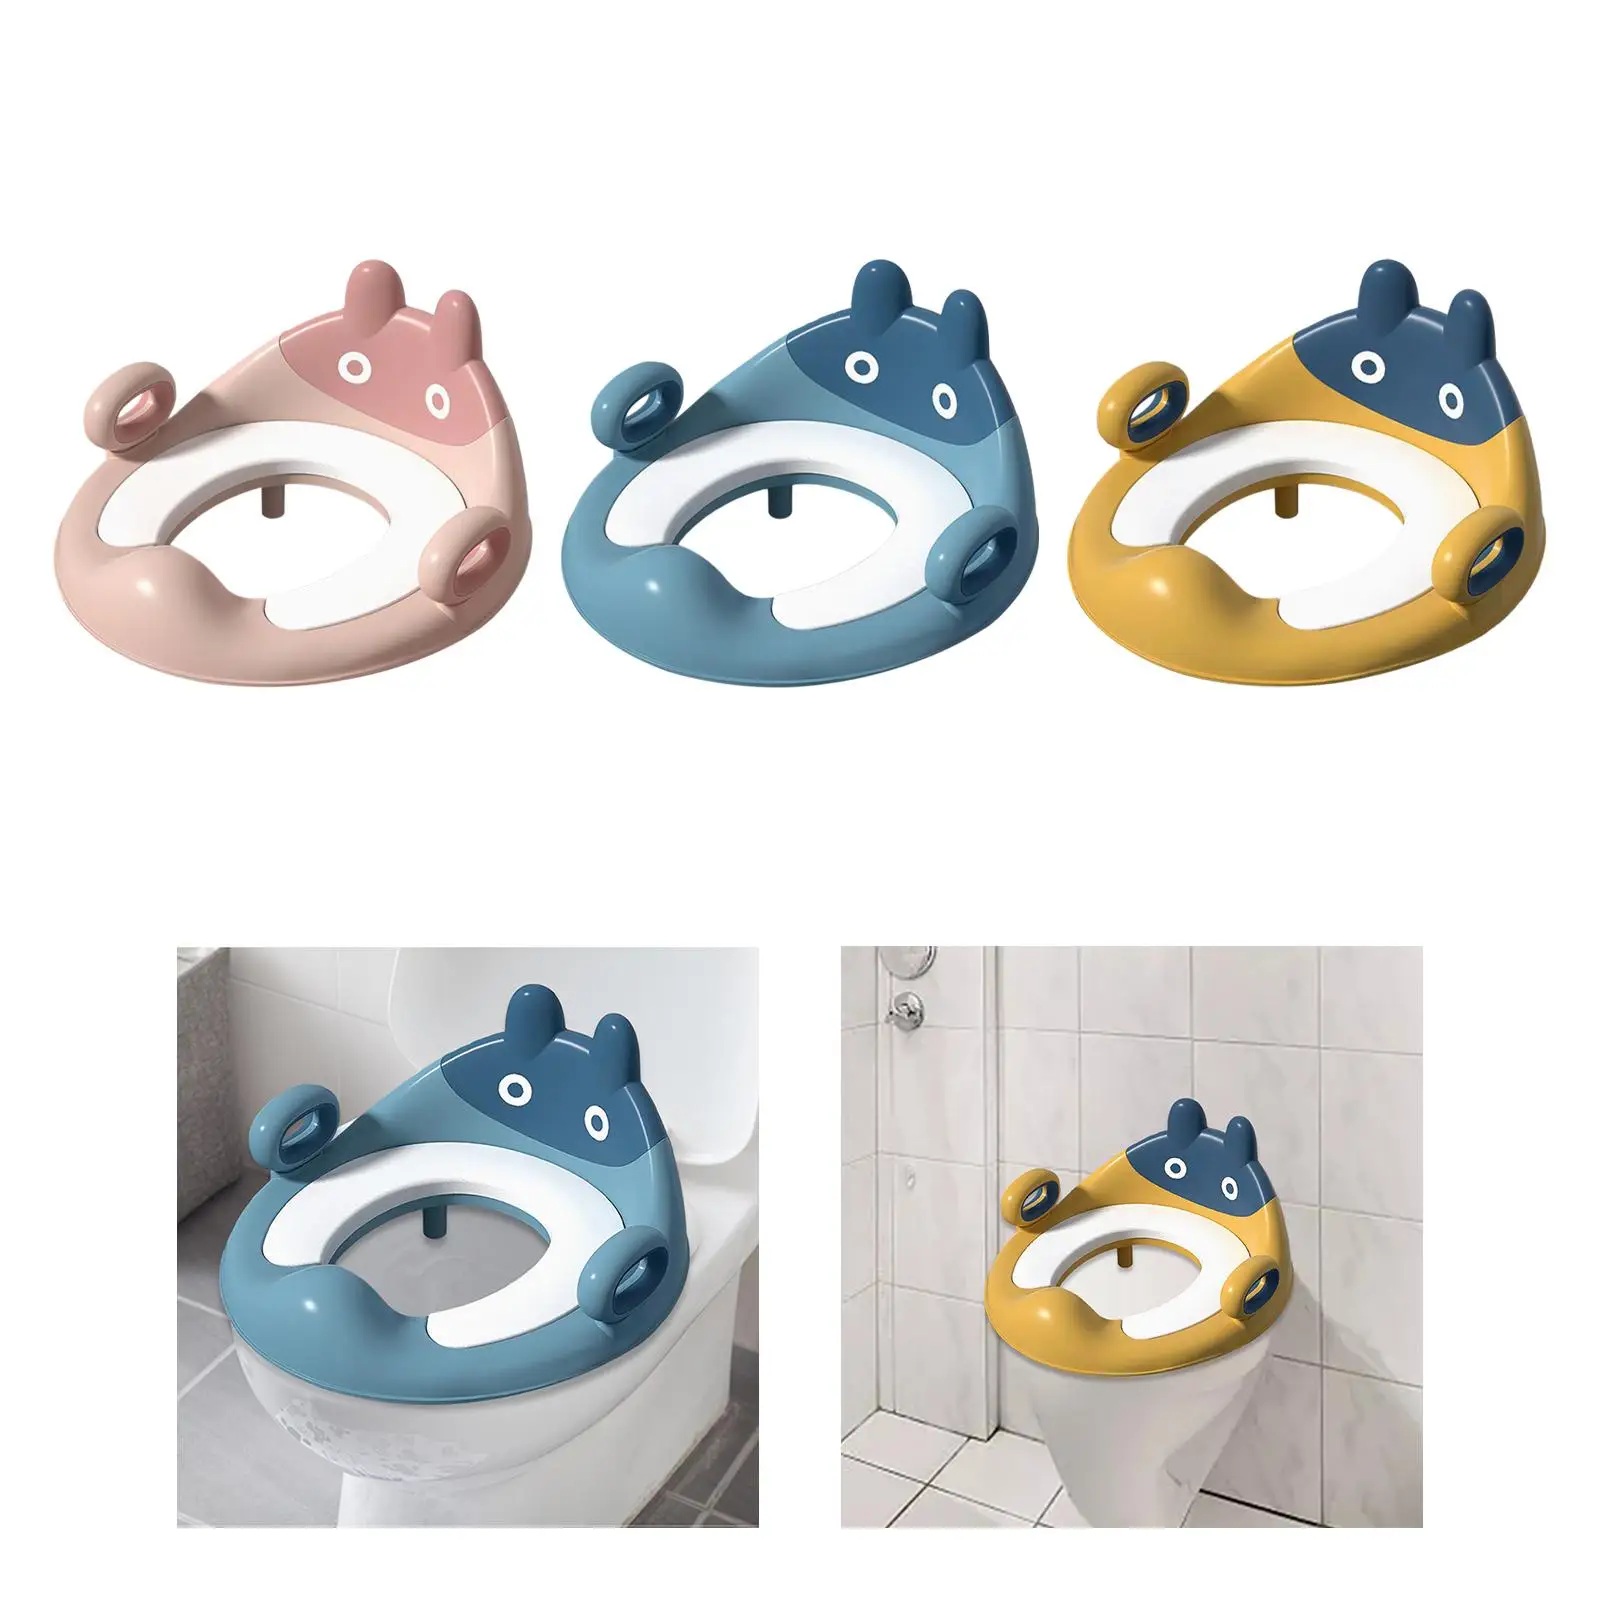 Potty Train Toilet Seat Fits Most Toilets Nonslip with Guard Training Toilet for Kids Toilet Trainer Seat for Kids Children Girl